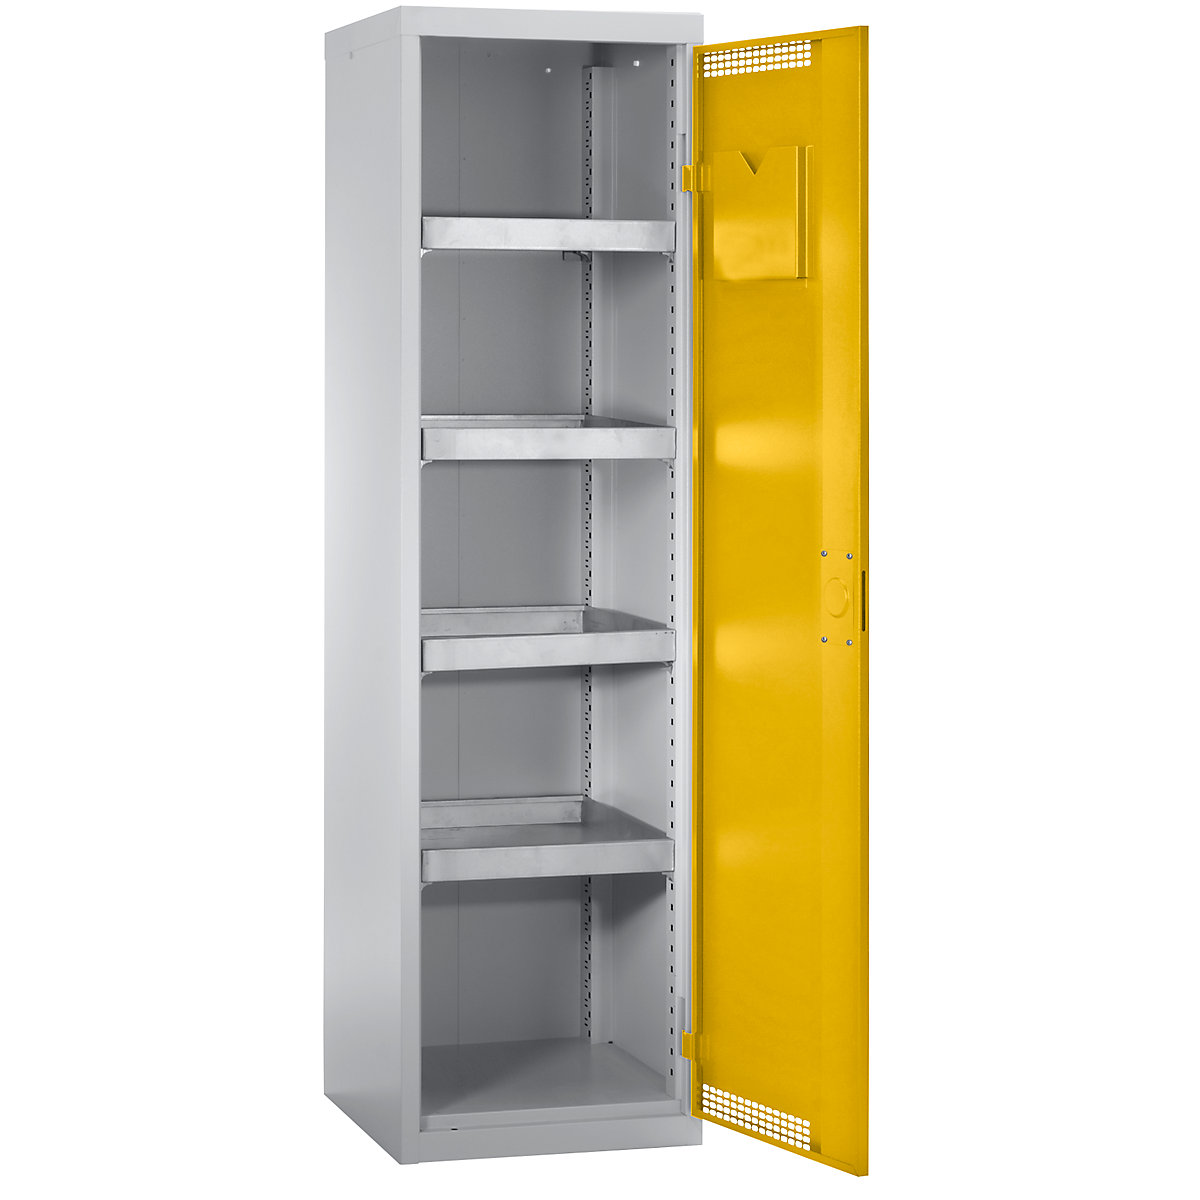 Environmental cupboard with door perforations, HxWxD 1800 x 500 x 500 mm, 4 tray shelves, light grey / signal yellow-4